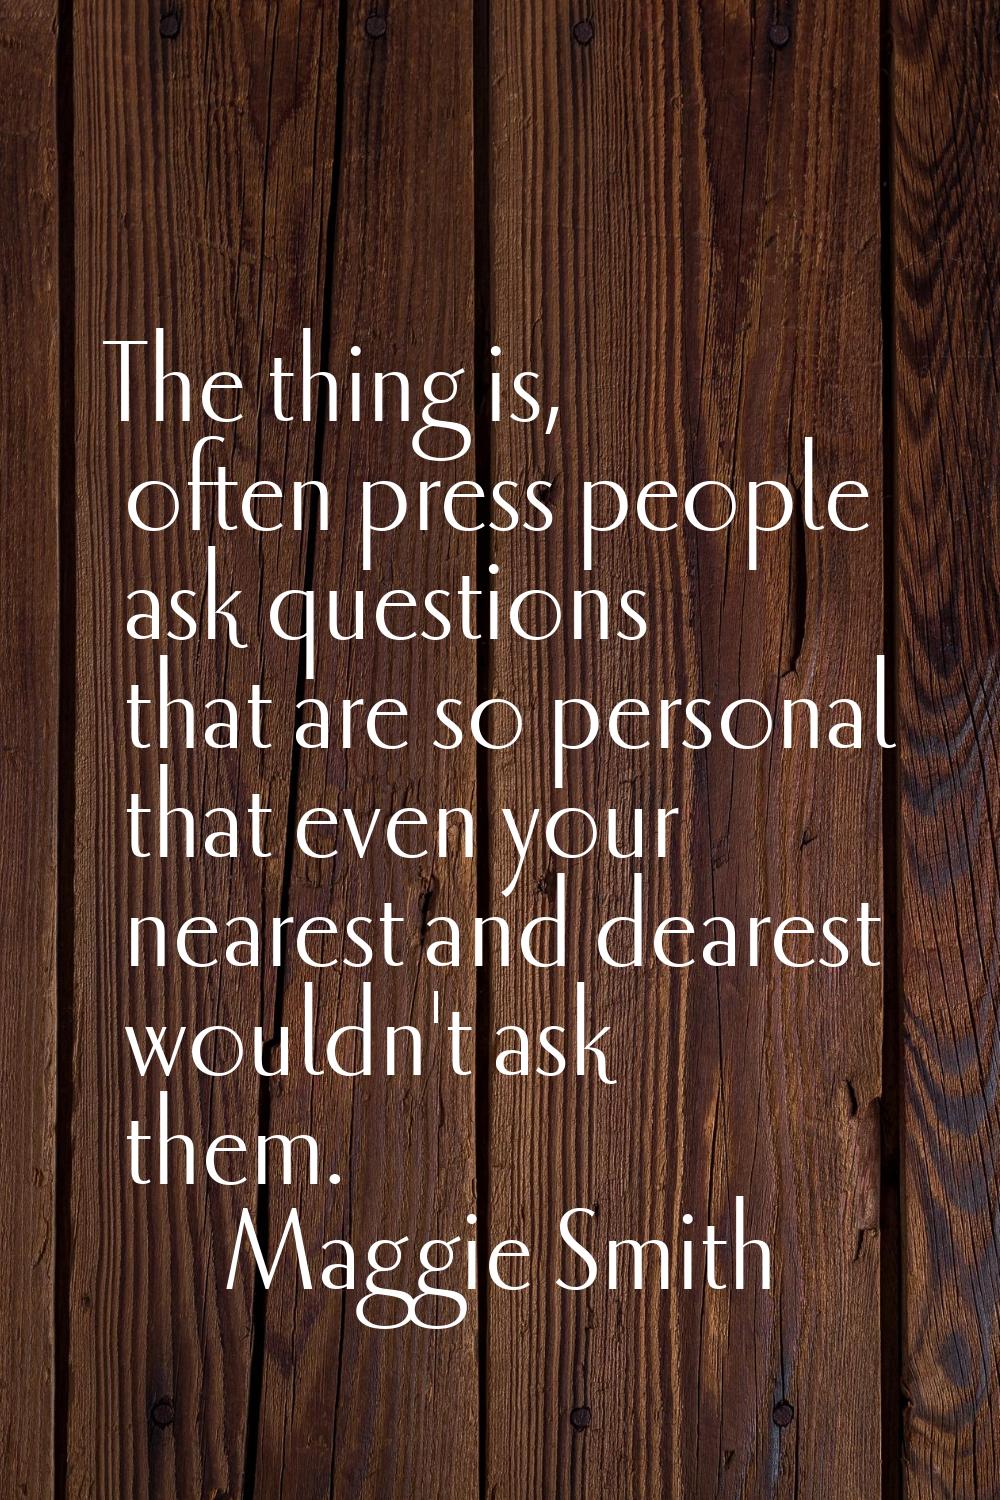 The thing is, often press people ask questions that are so personal that even your nearest and dear